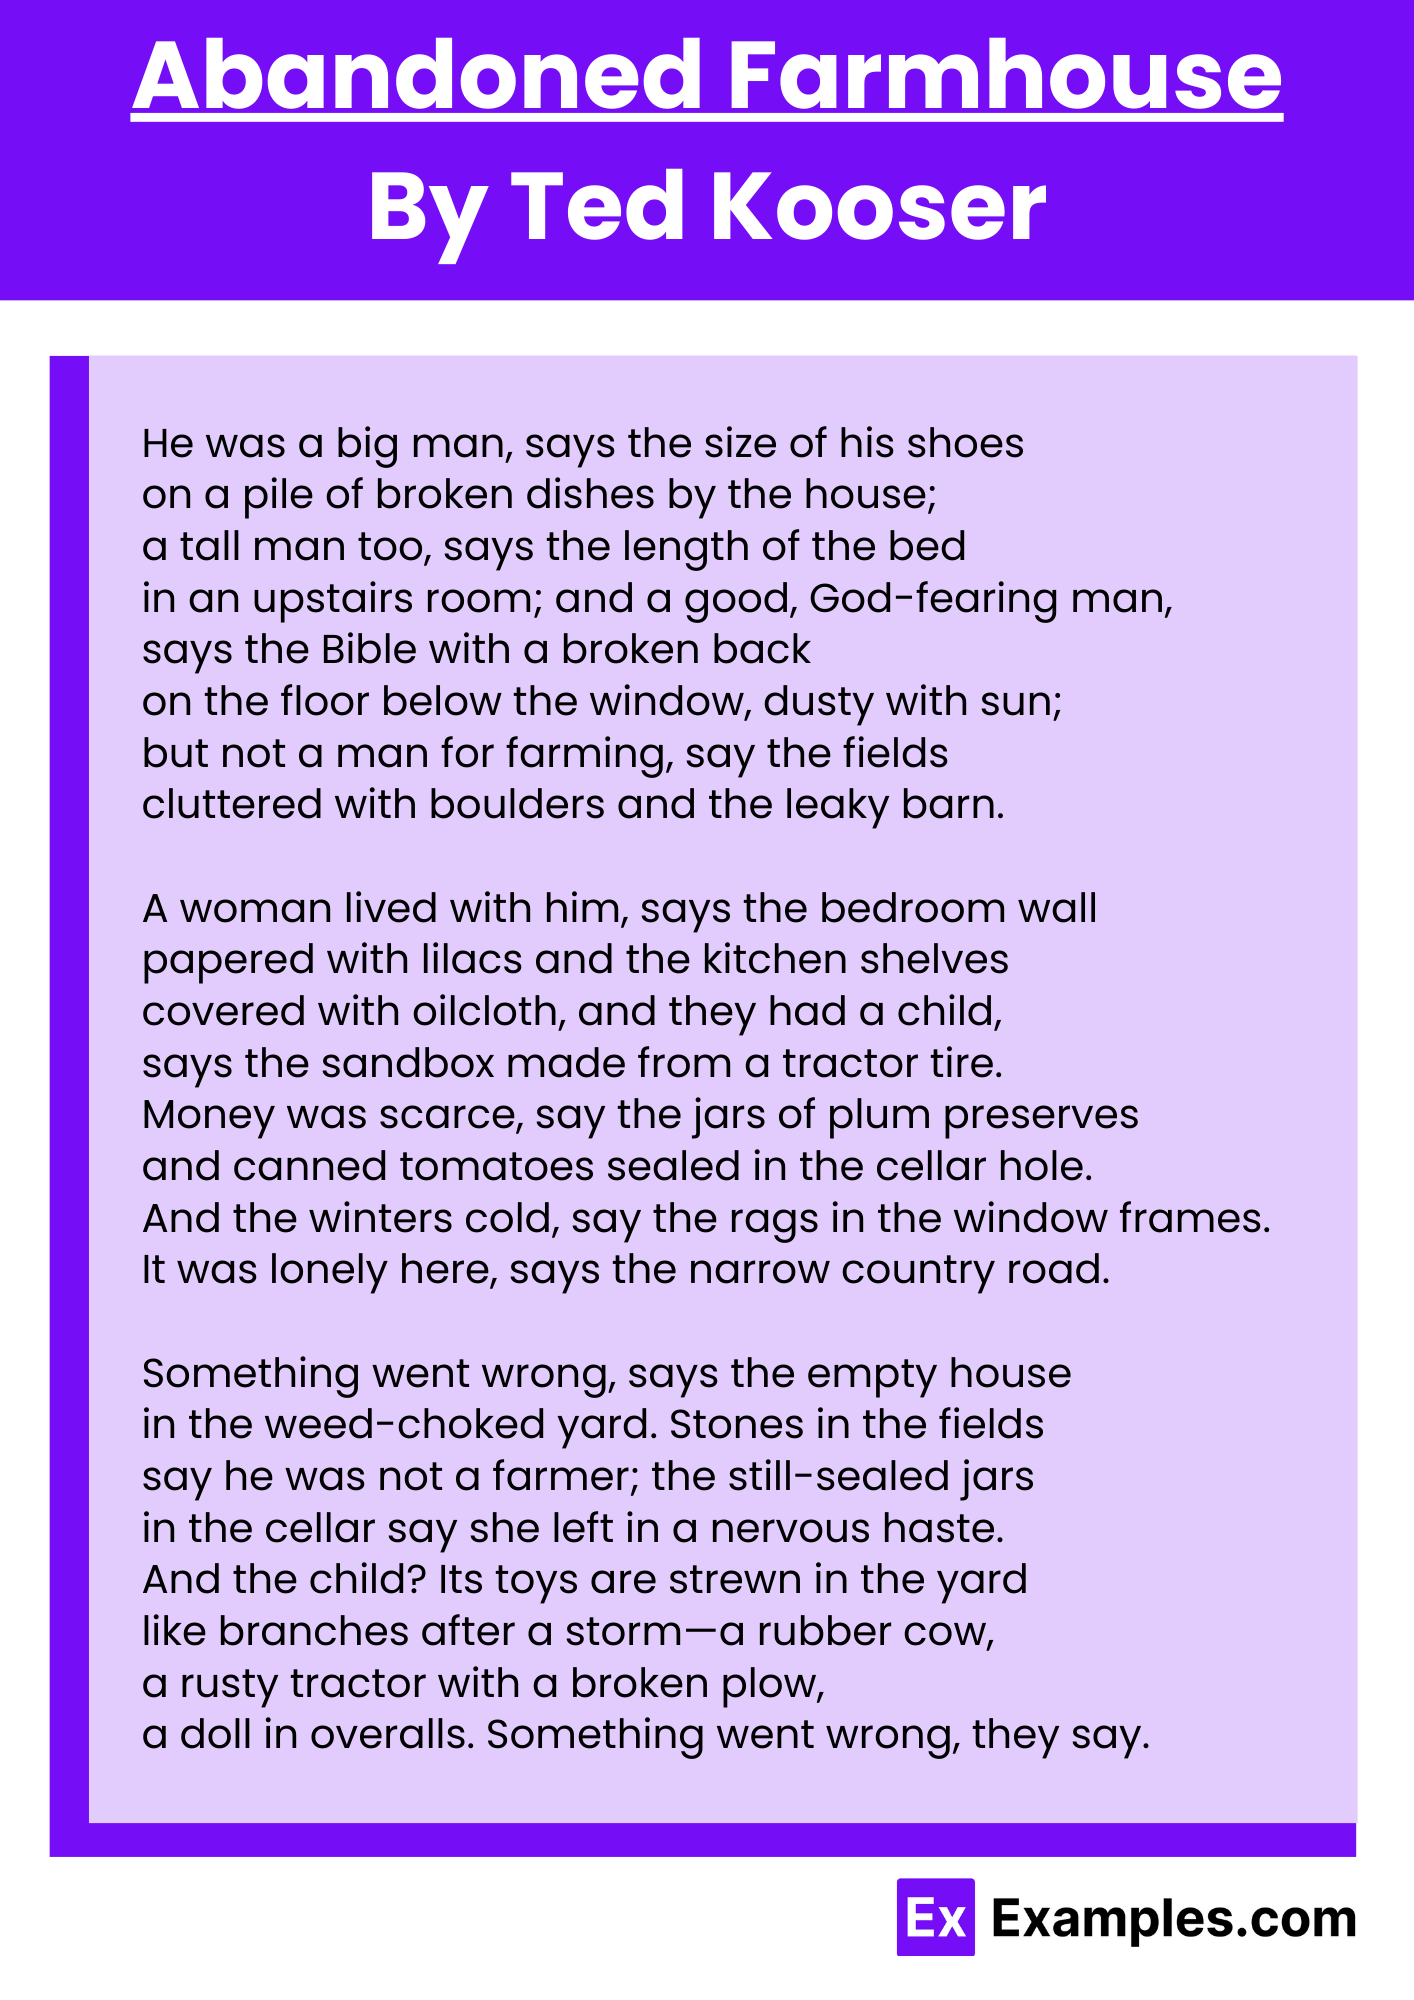 Abandoned Farmhouse By Ted Kooser